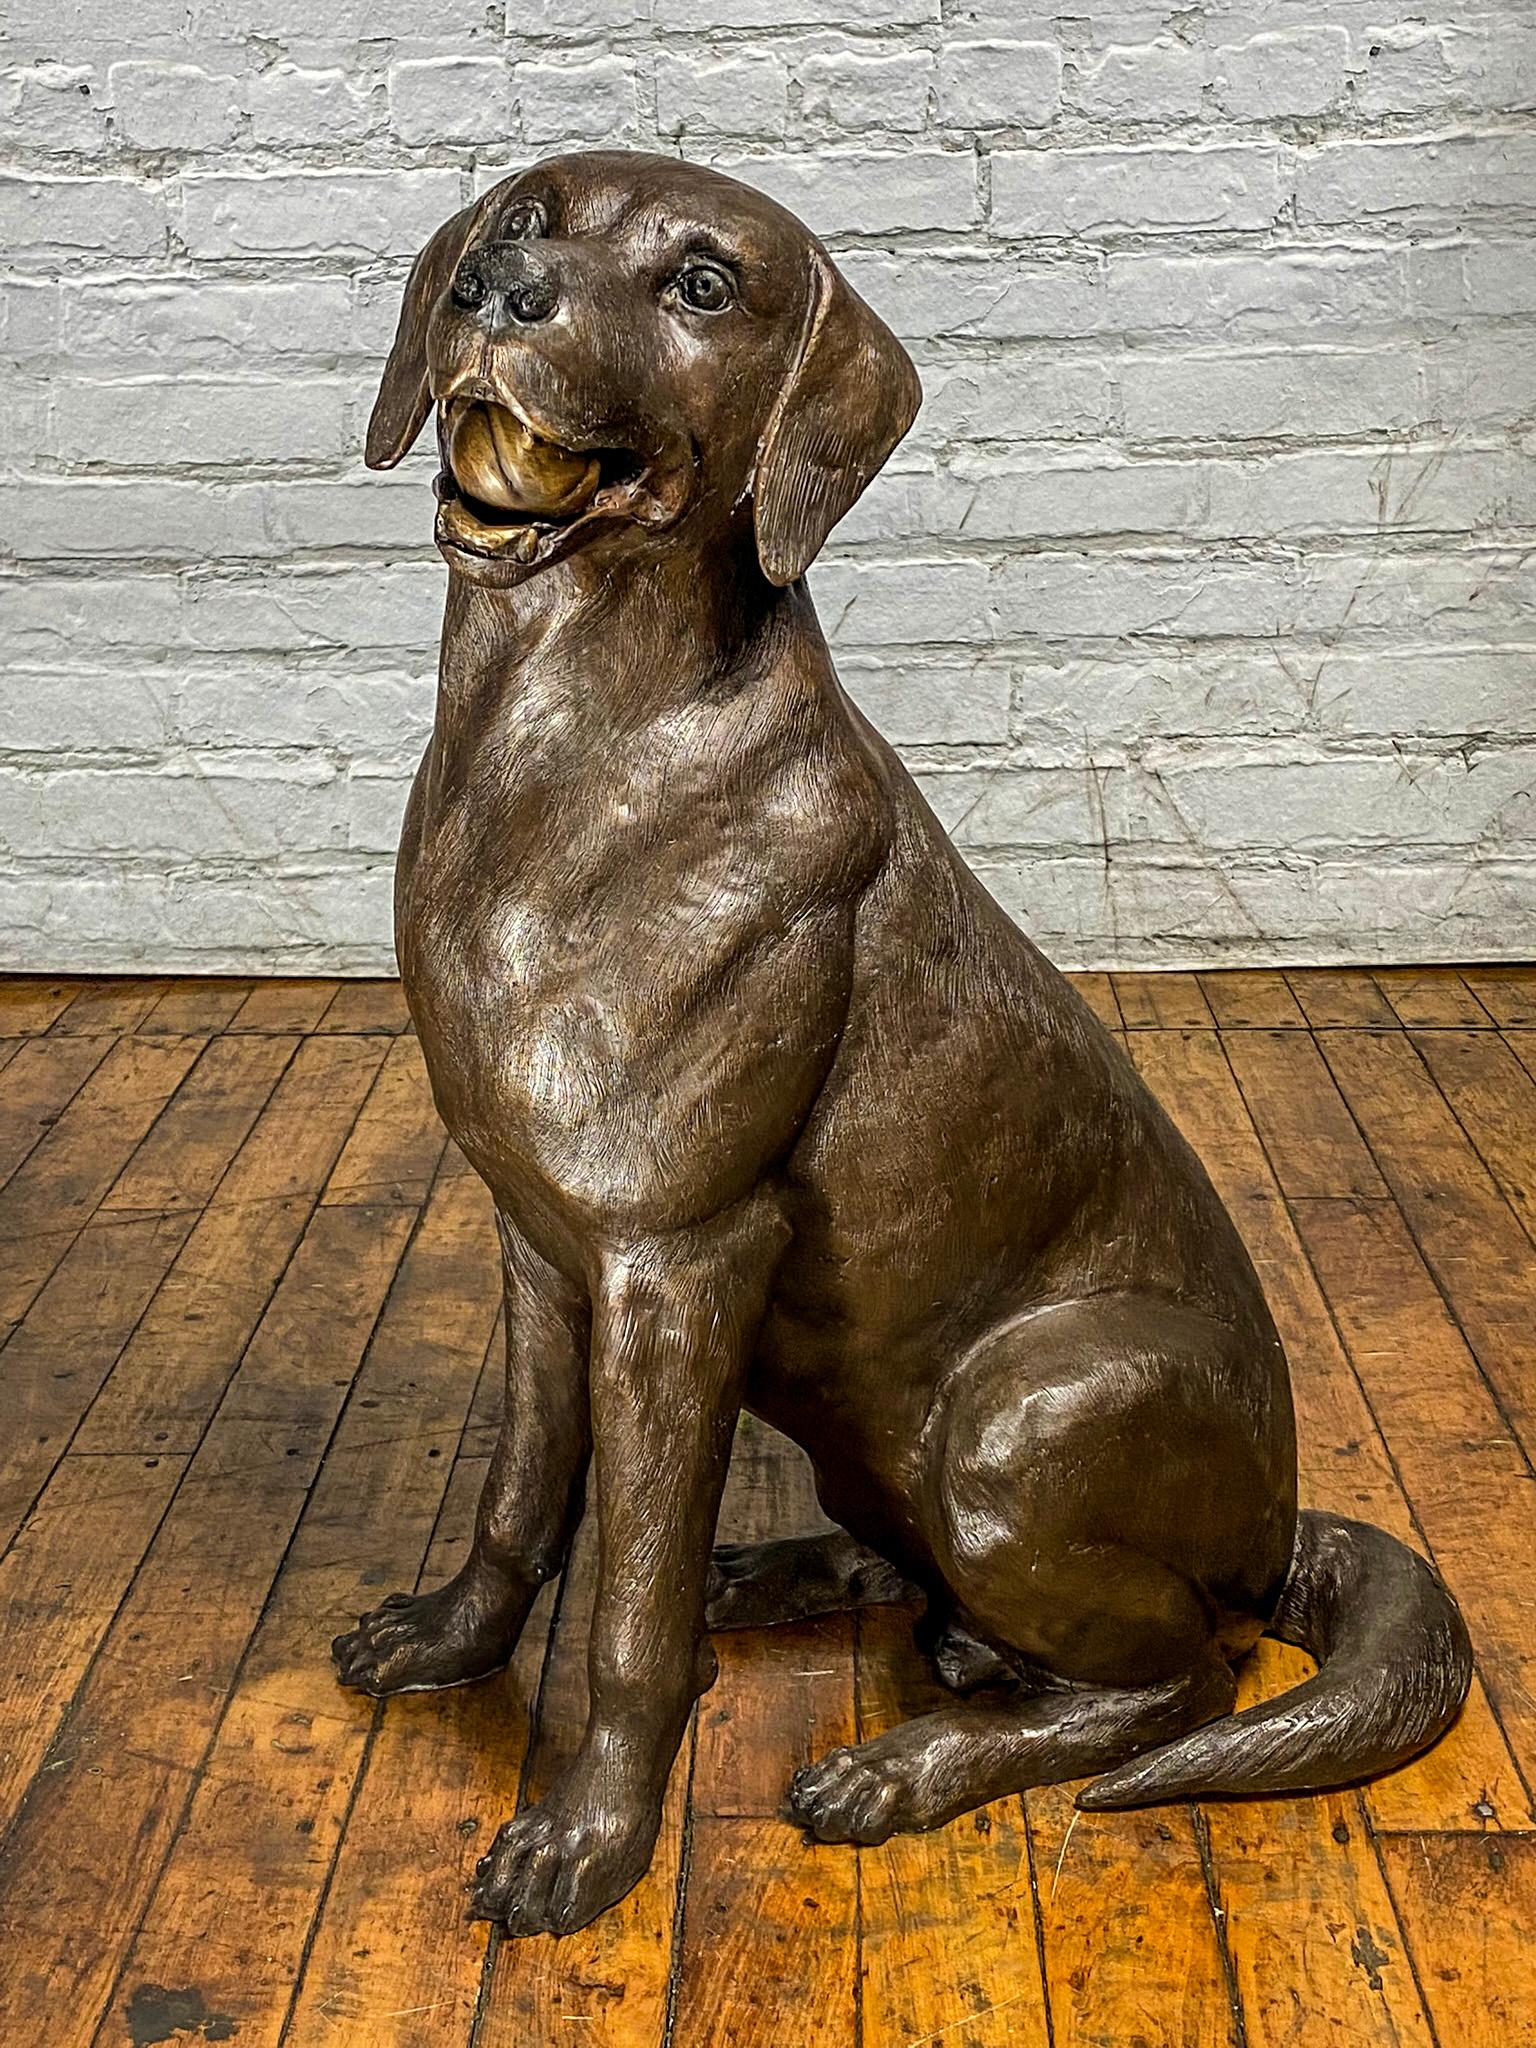 Our beautiful, limited edition custom bronze Labrador Retriever dog statue is designed after our beloved dog, Bailey. This adorable bronze statue features Bailey with a ball in his mouth waiting to play fetch! This fastidiously designed dog